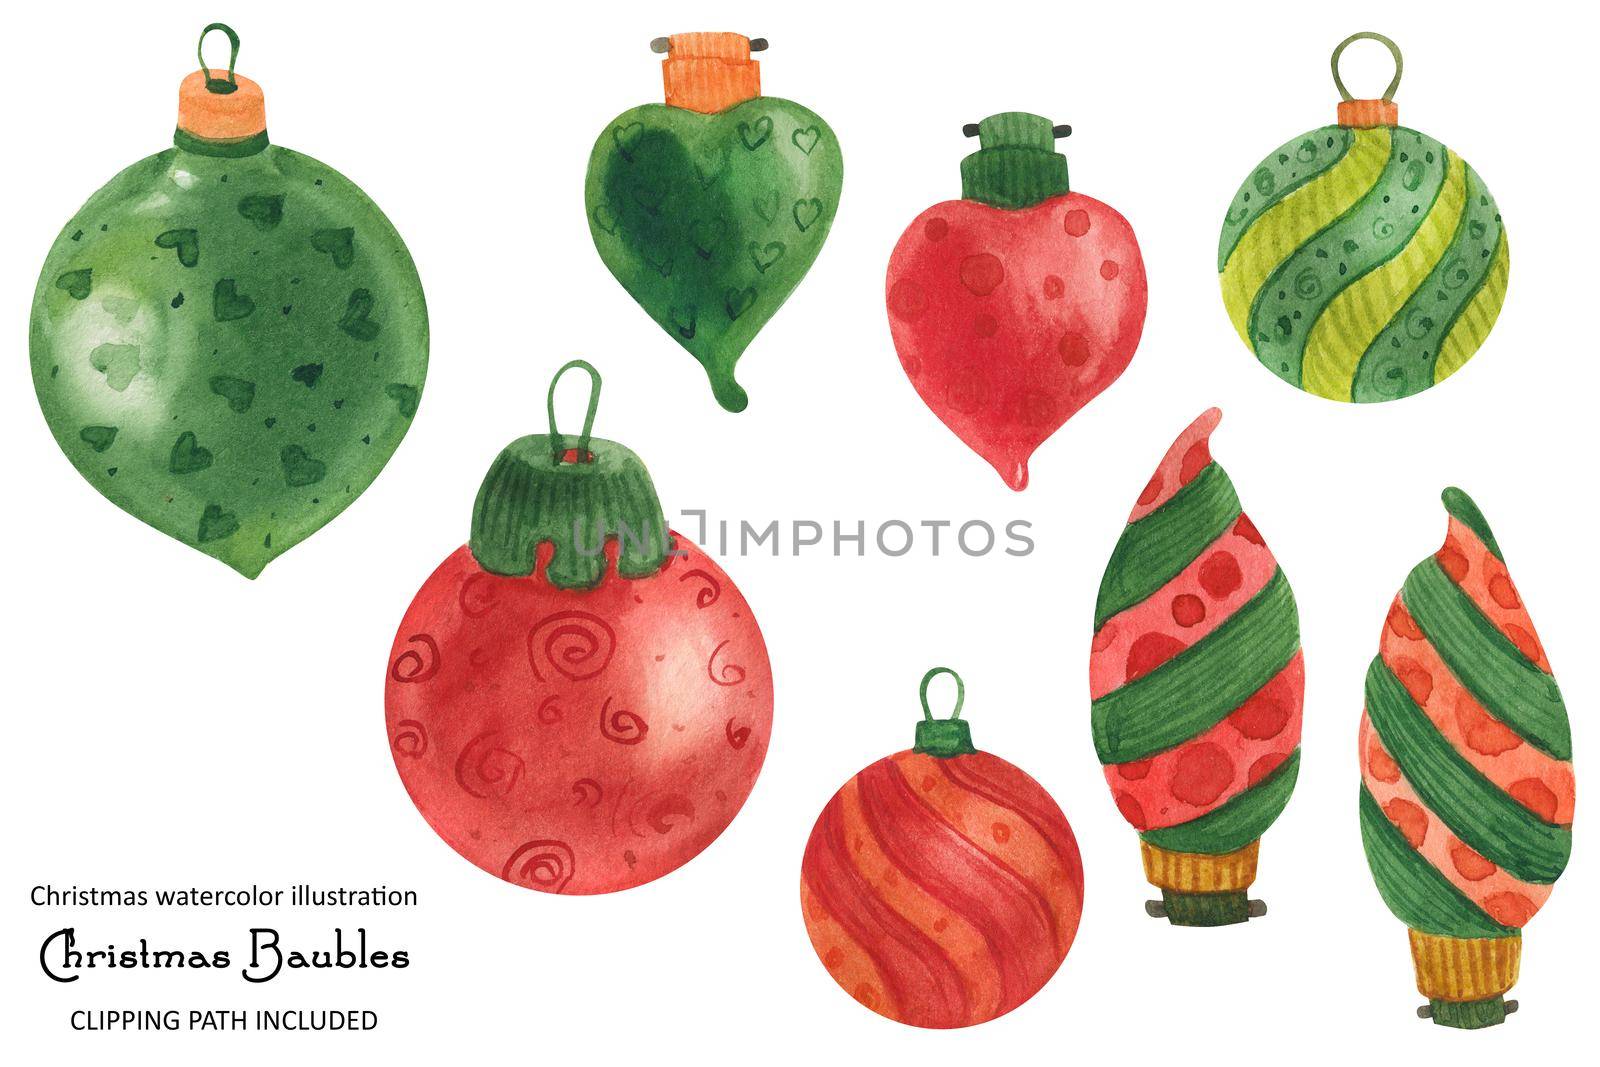 Christmas baubles, watercolor illustration by Xeniasnowstorm